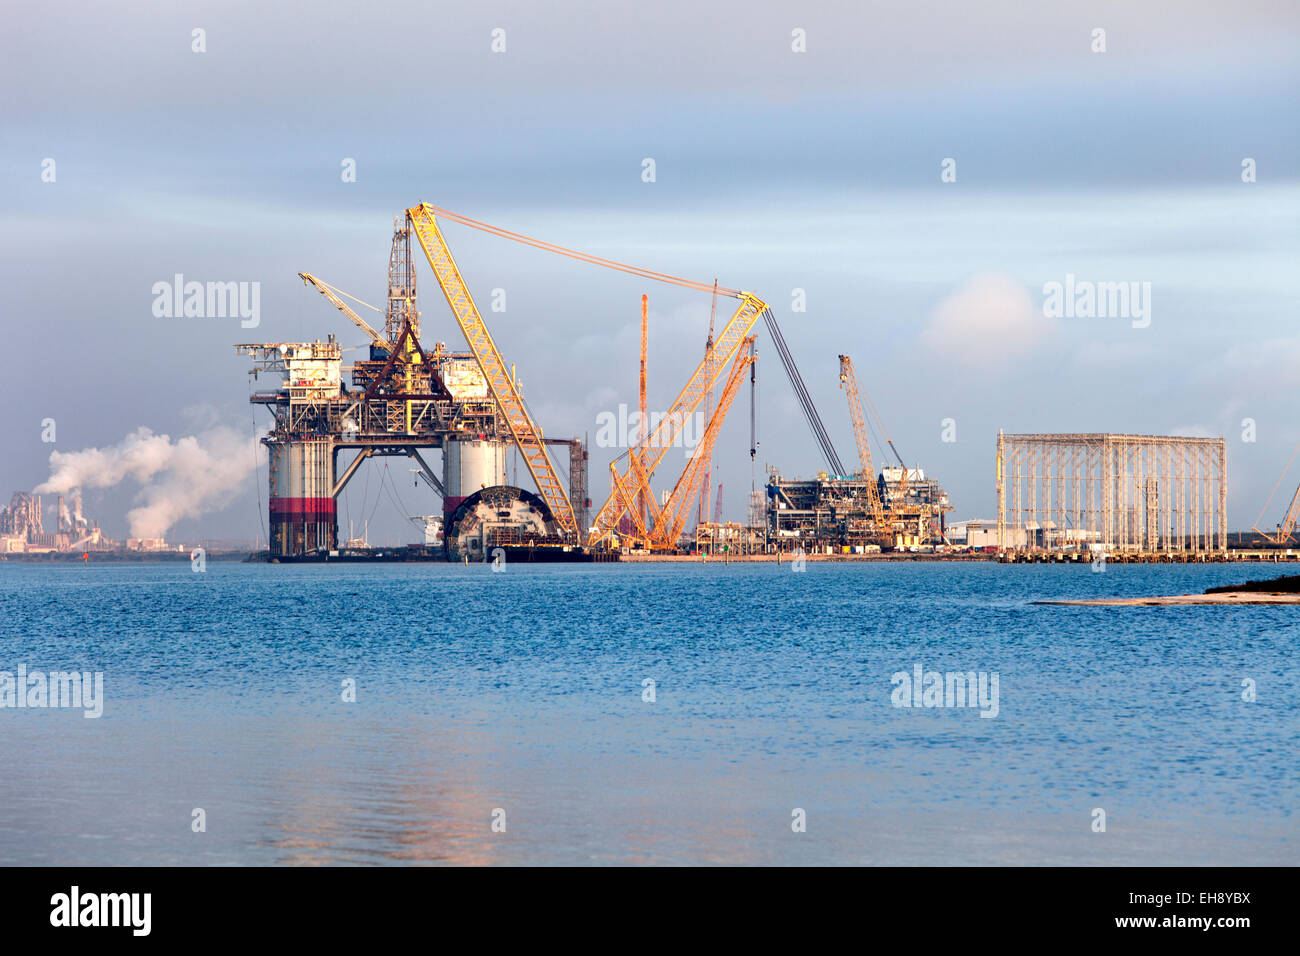 Construction of 'Big Foot' deepwater oil & gas platform nearing completion. Stock Photo